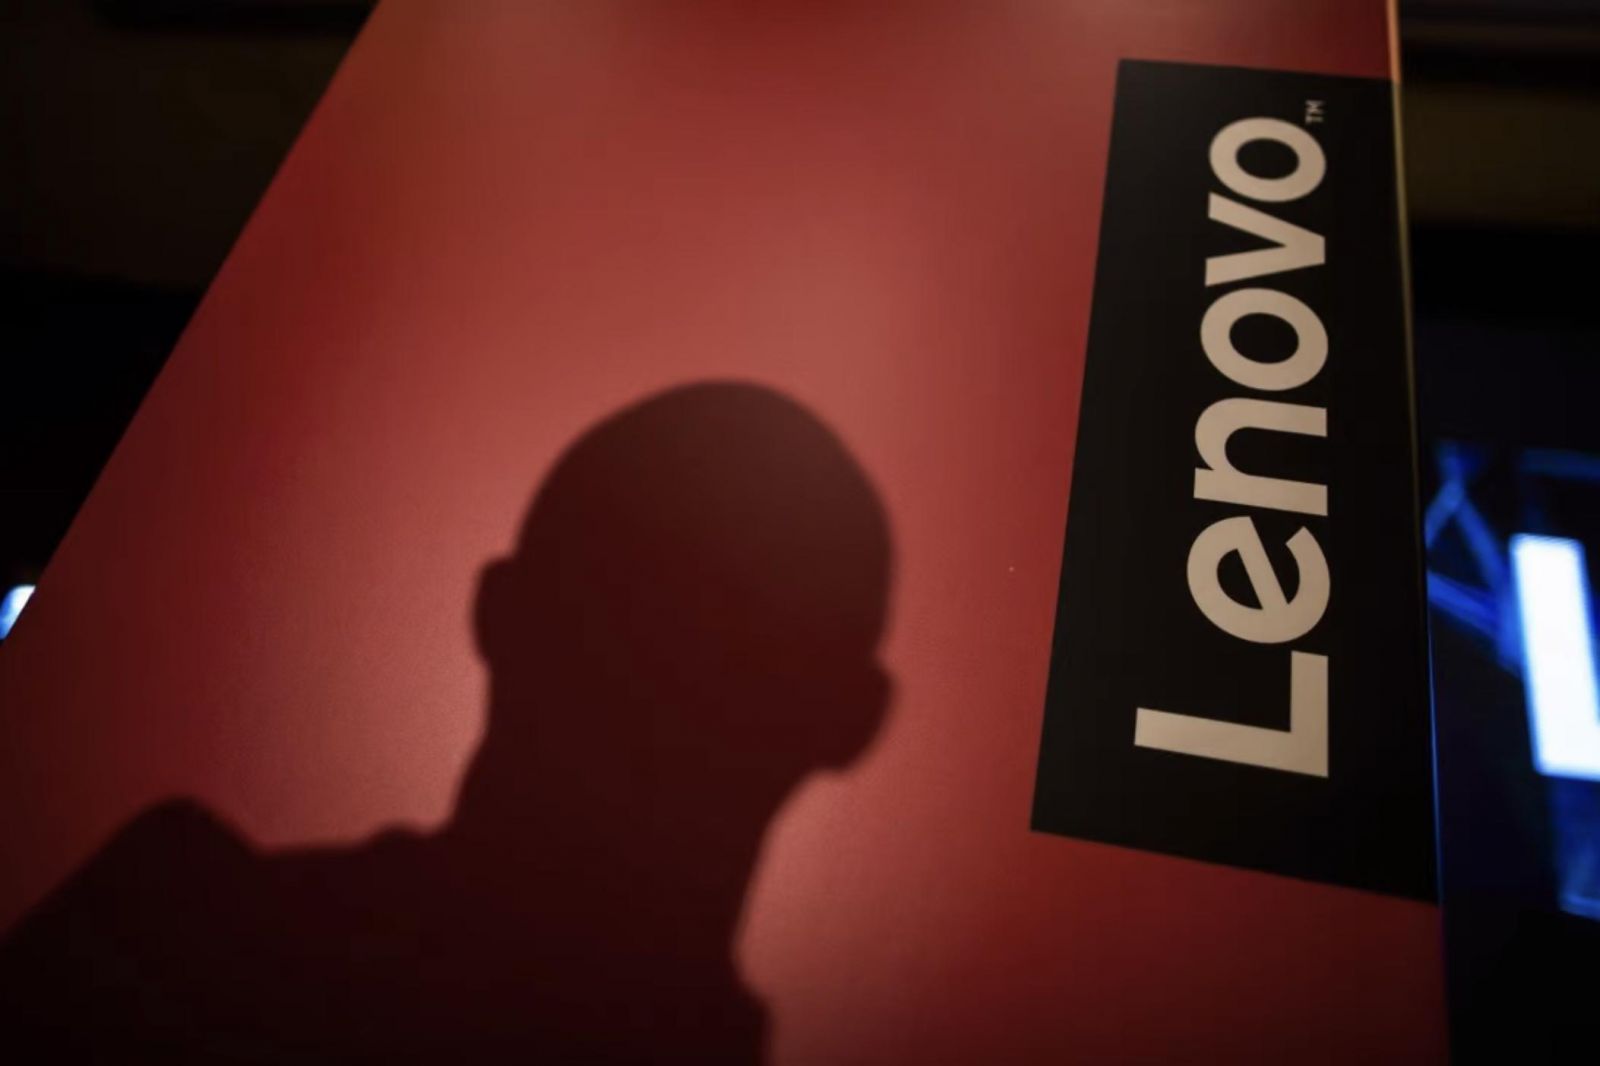 Lenovo defends 2009 equity stake deal after storm of online attacks